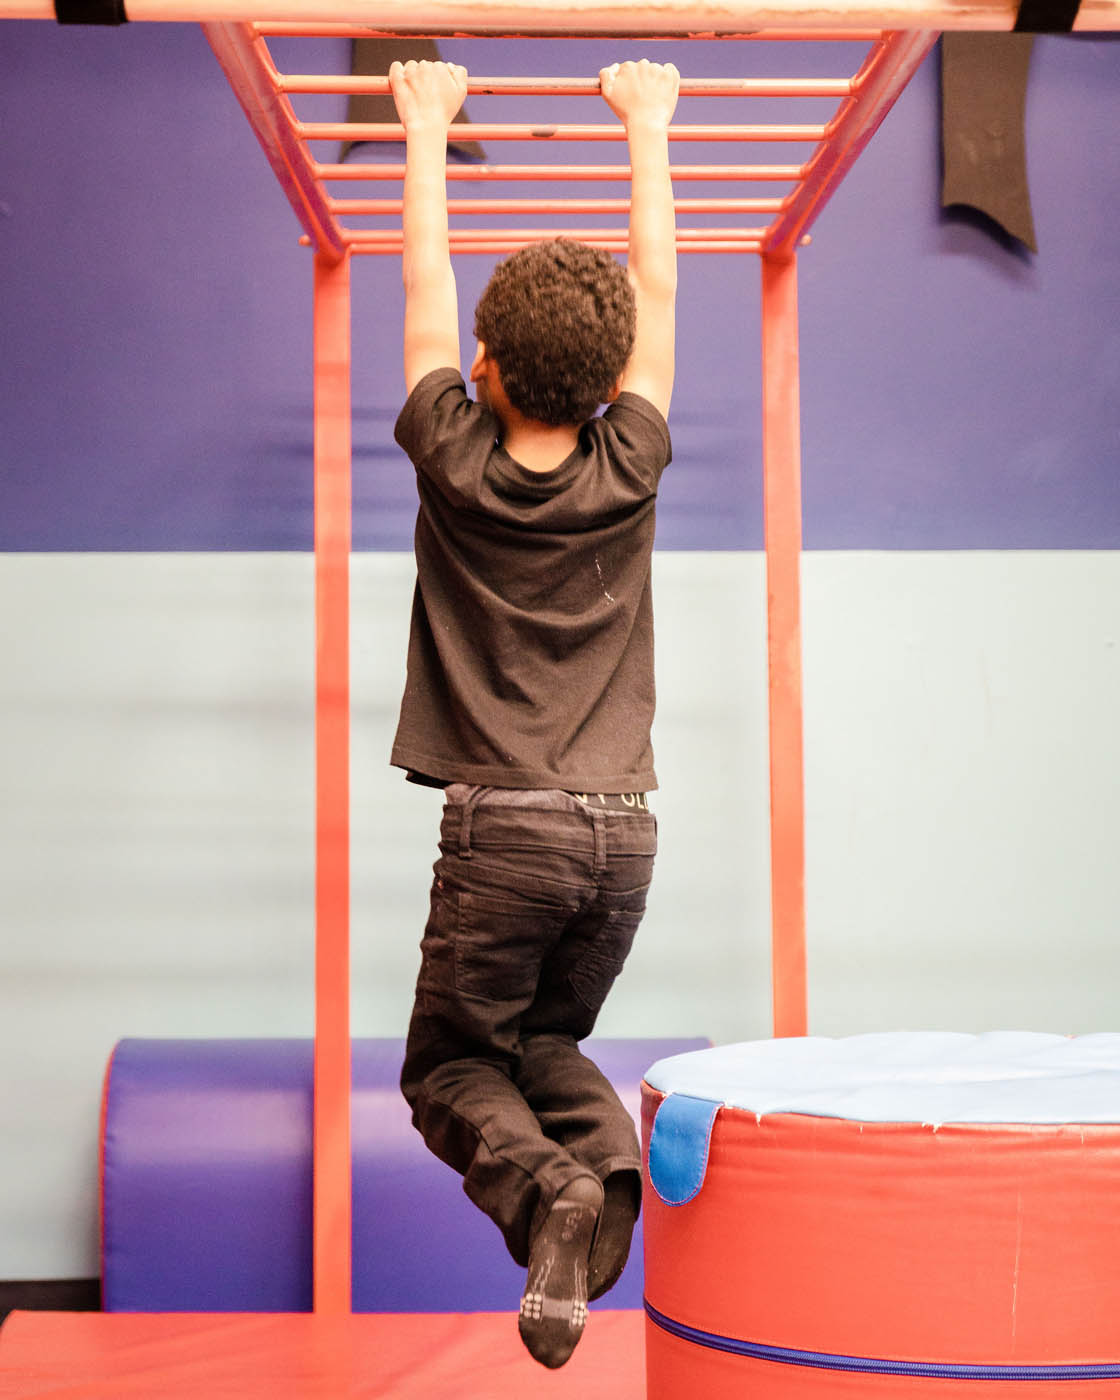 A little boy hanging on monkey bars, contact us today about our baby groups in Willow Grove, PA.